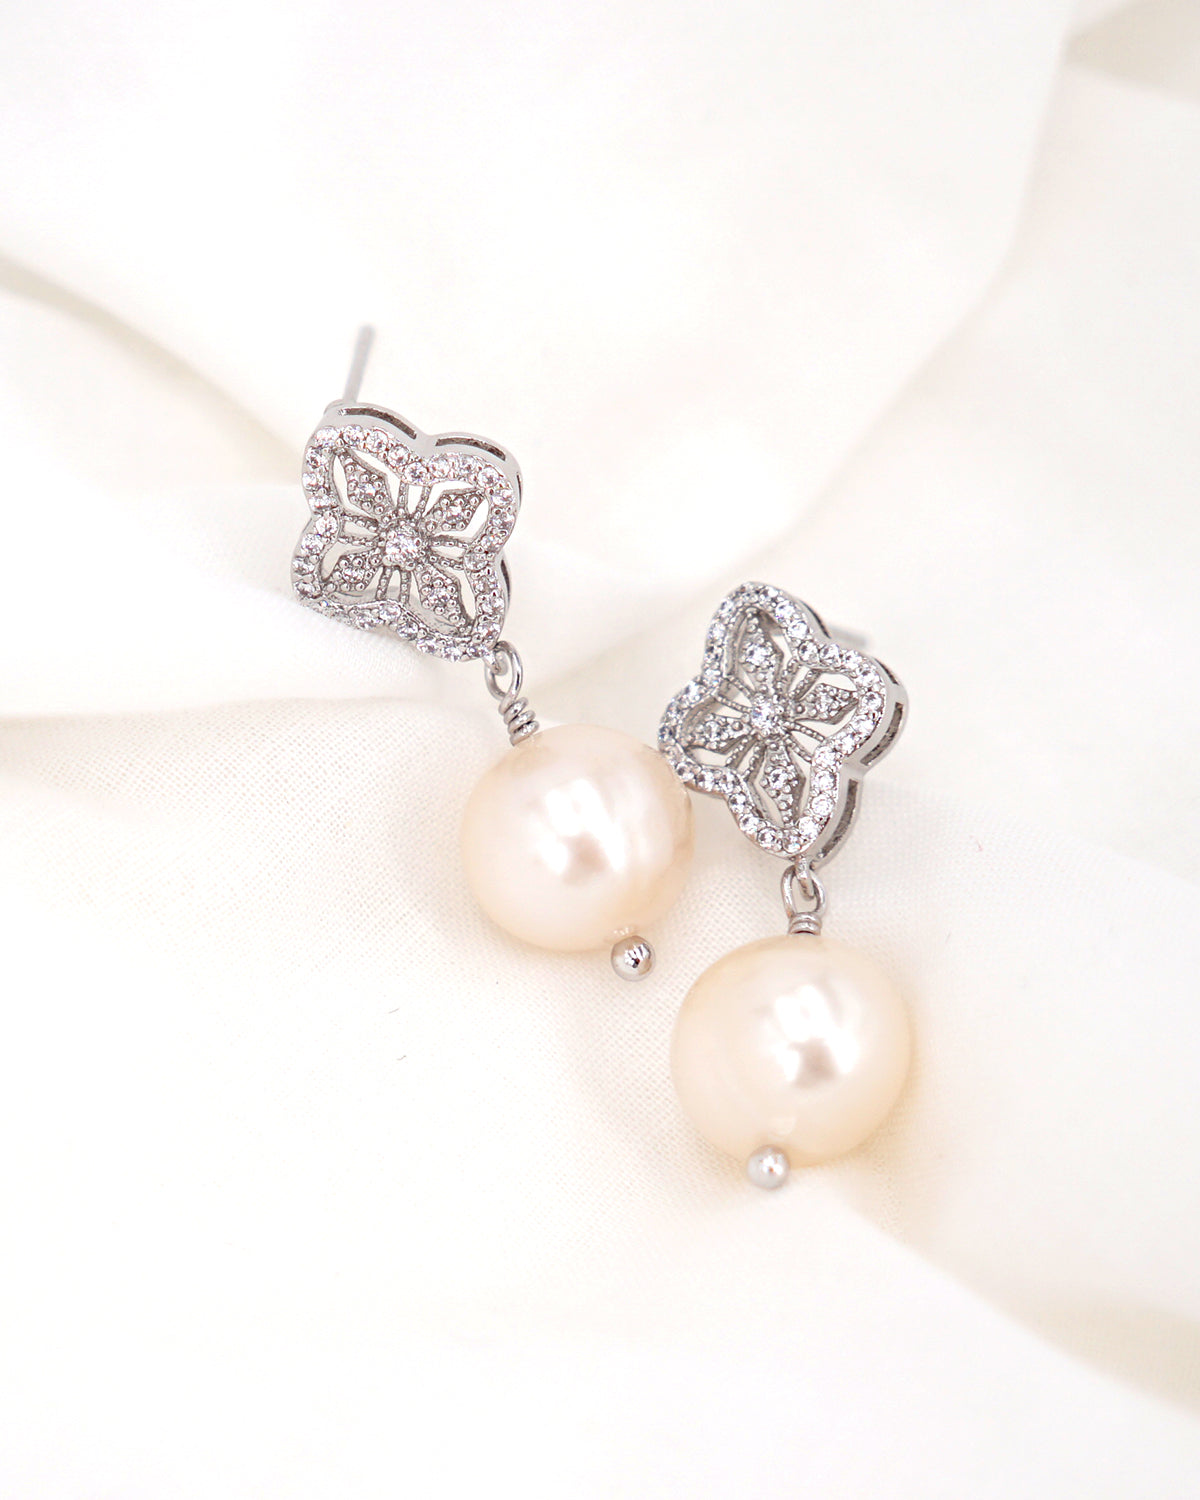 Freshwater Pearl Earrings - Vintage - Wedding Bridal Jewelry for Brides and Bridesmaids | Singapore